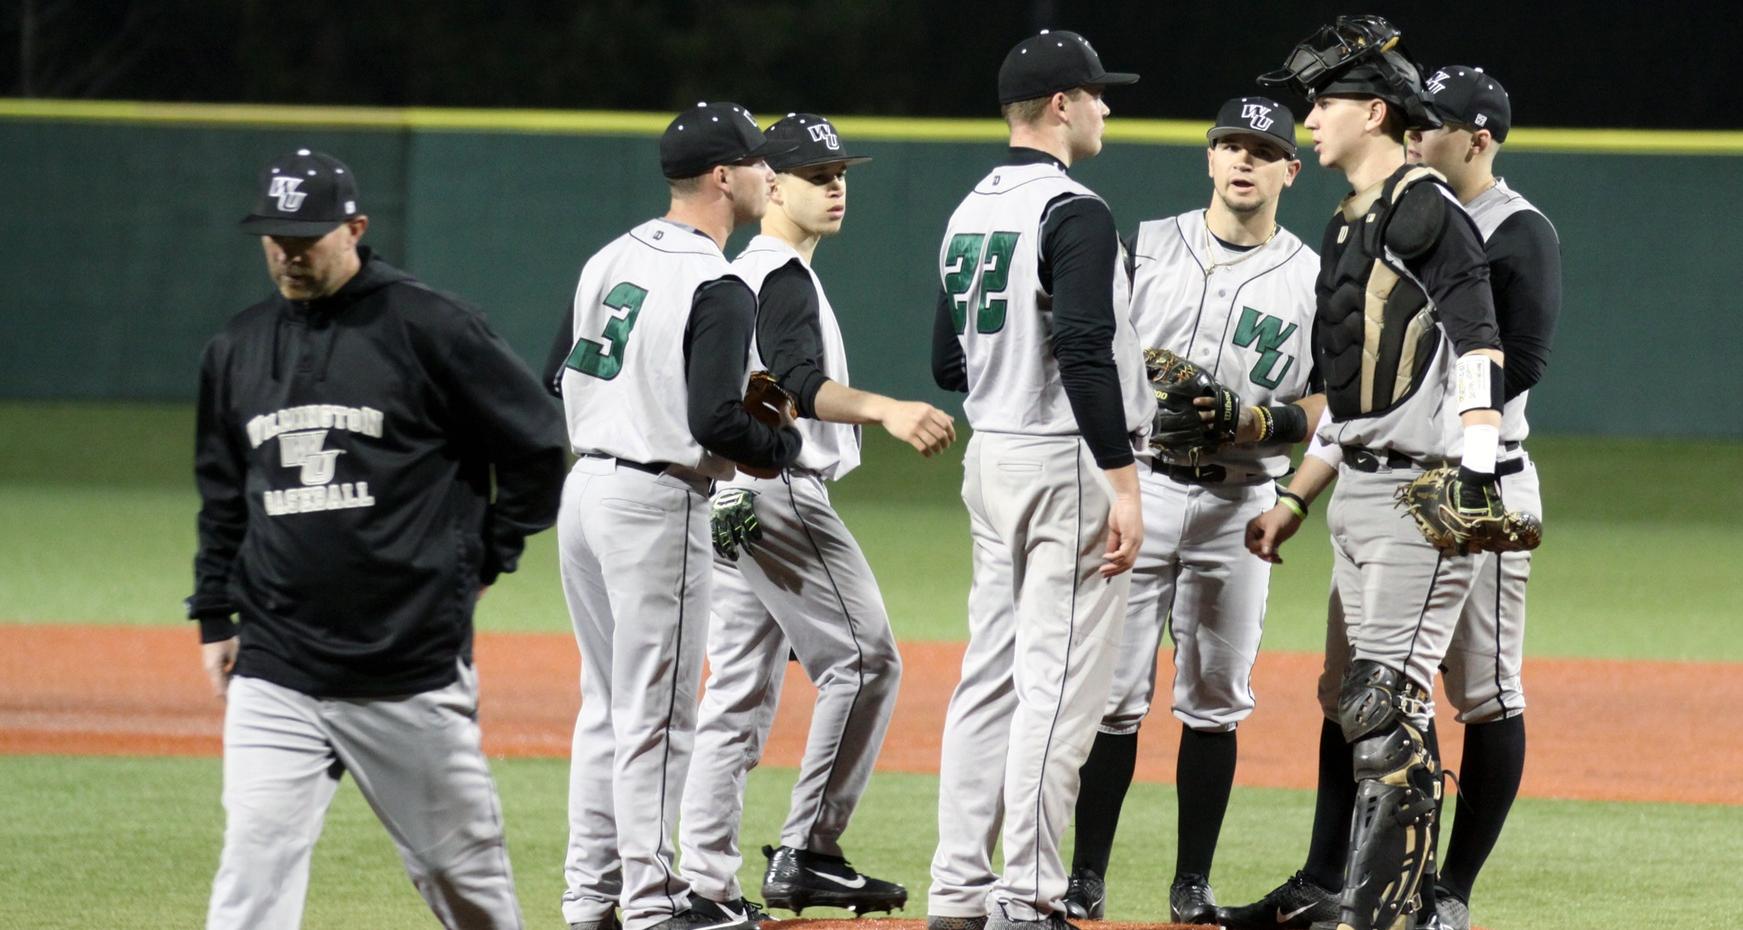 Copyright 2019; Wilmington University. All rights reserved. Photo by Dan Lauletta. February 23, 2019 vs. St. Thomas Aquinas in Myrtle Beach, S.C.